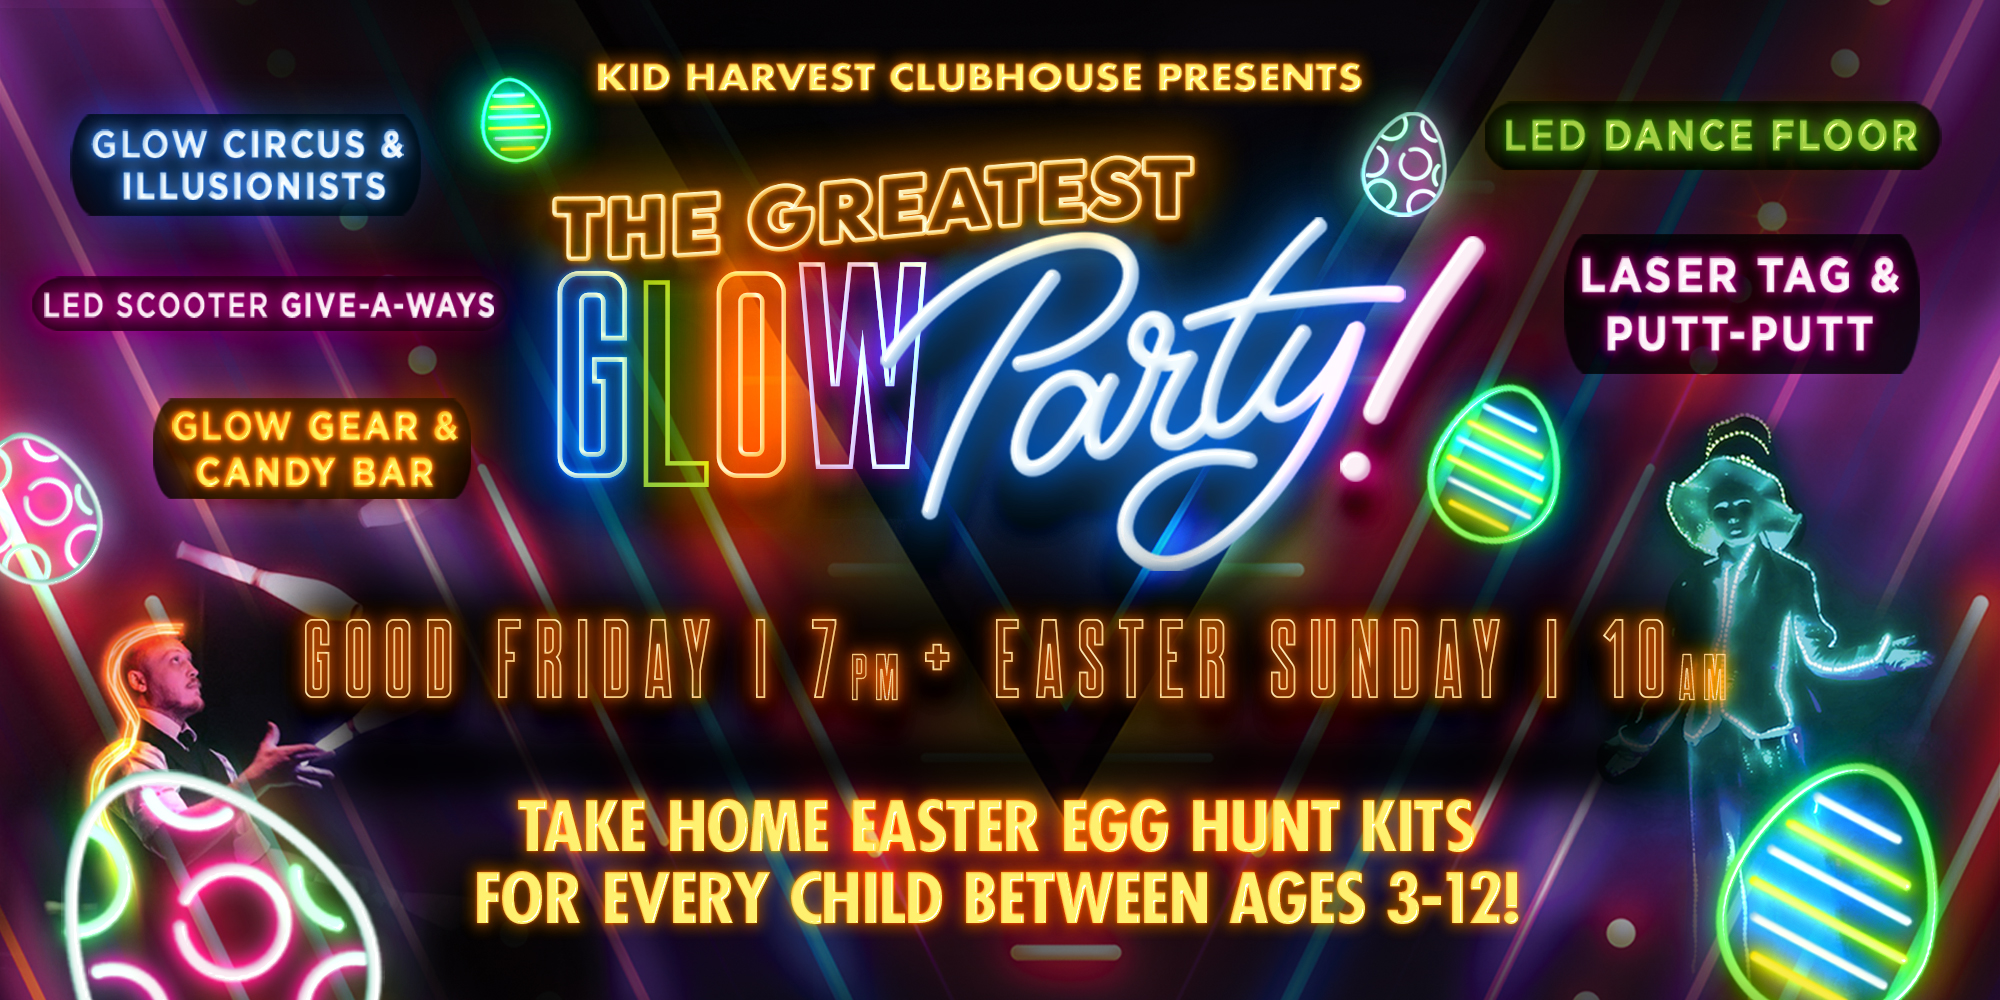 Kid Harvest Clubhouse Presents the Greatest Glow Party! Glow Circus & Illusionists Led Scooter Give-a-ways Glow Gear & Candy Bar Led Dance Floor Laser Tag & Putt-putt Good Friday 7 Pm + Easter Sunday 10am Take Home Easter Egg Hunt Kits for Every Child Between Ages 3-12!